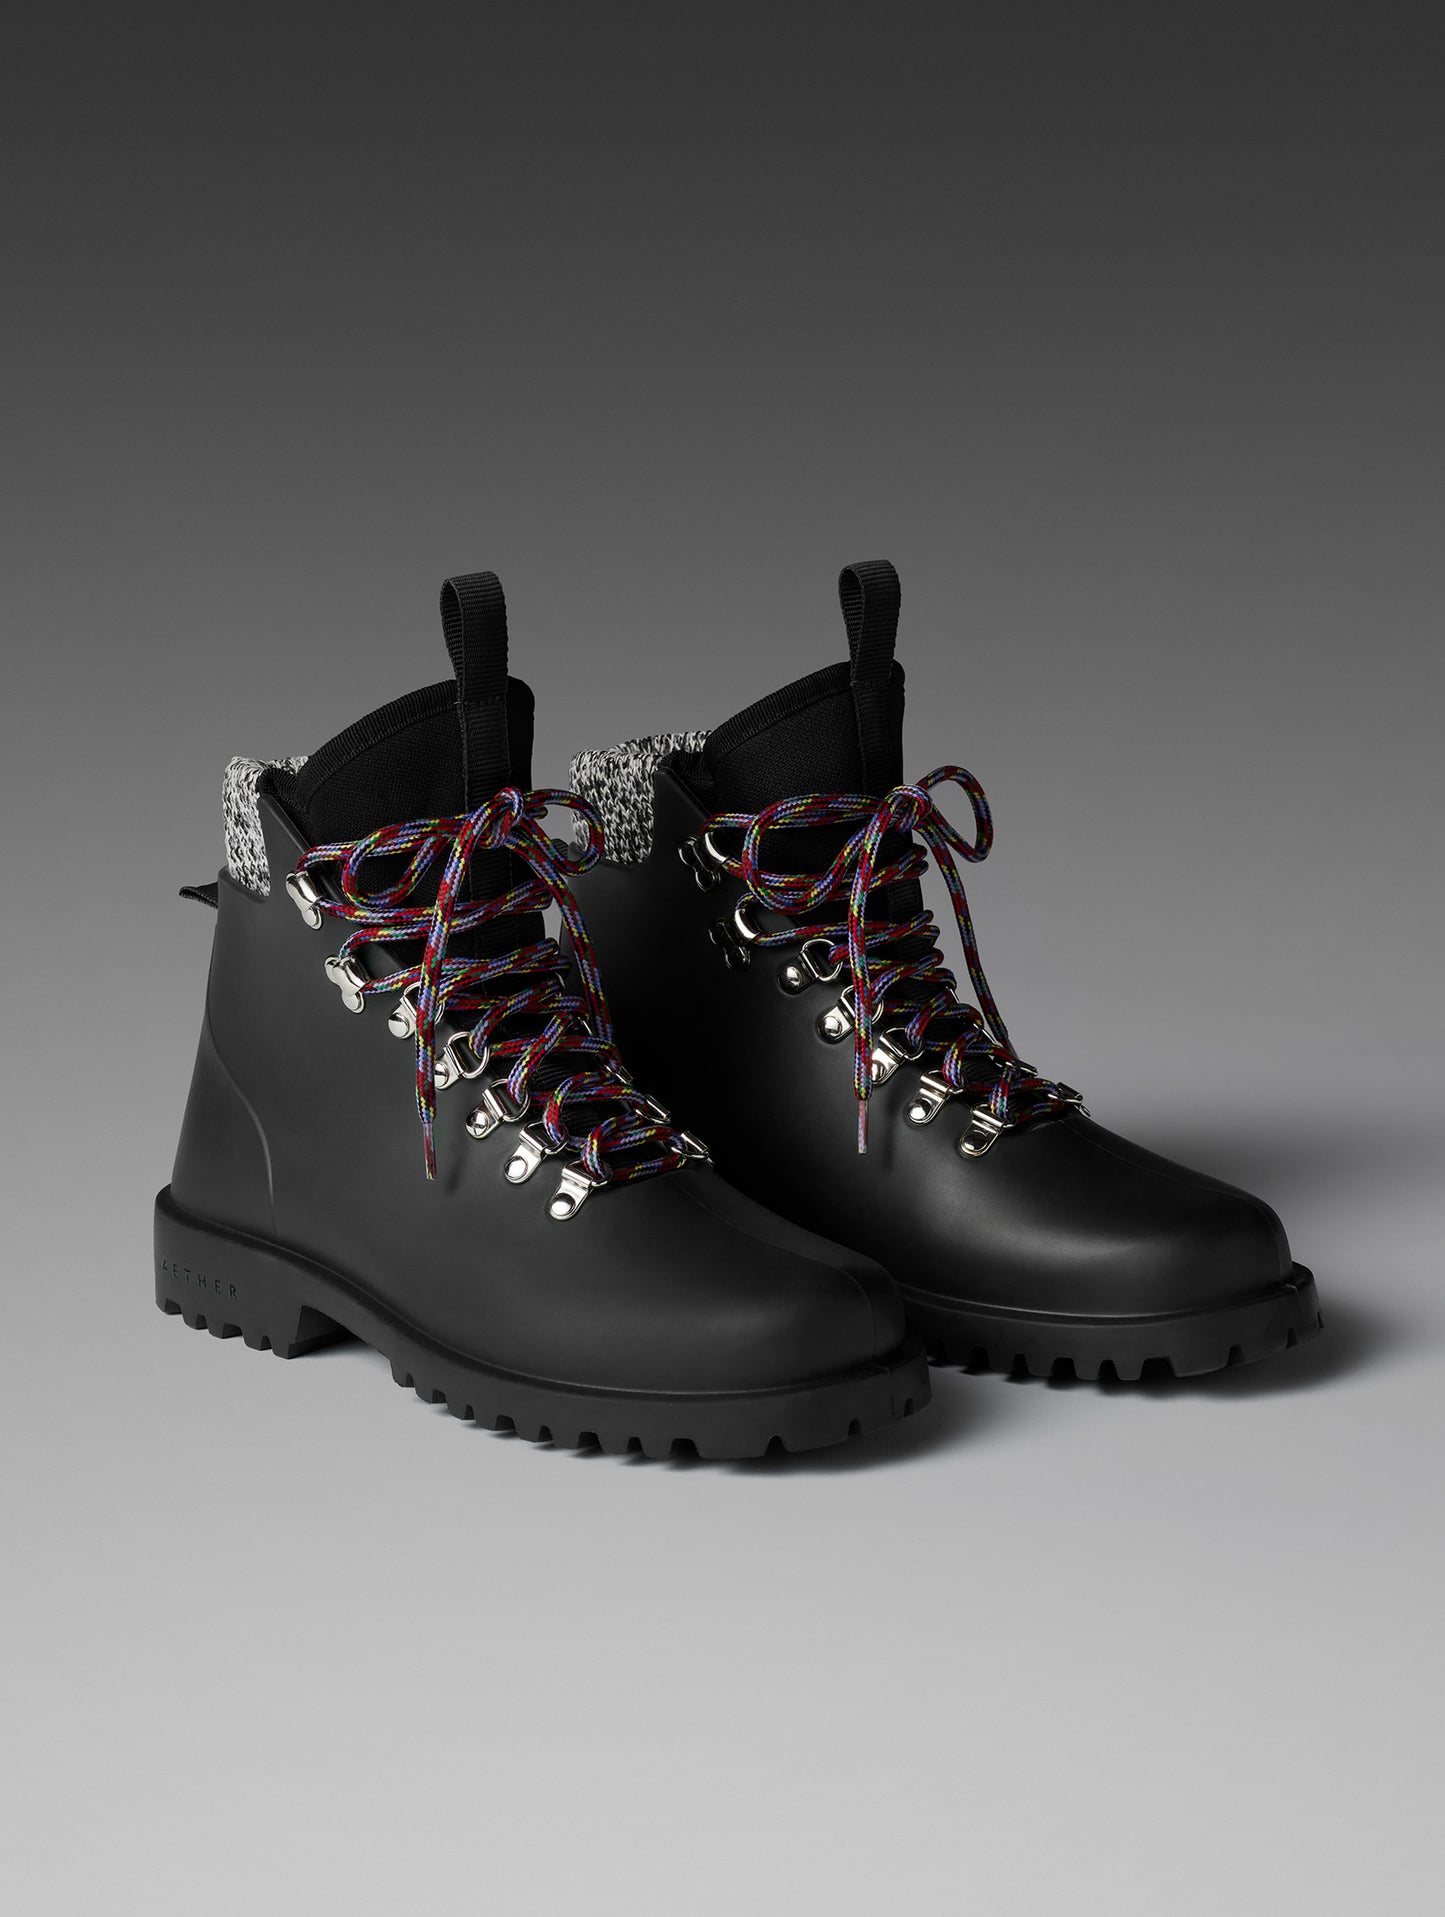 women's black rain boot from AETHER Apparel